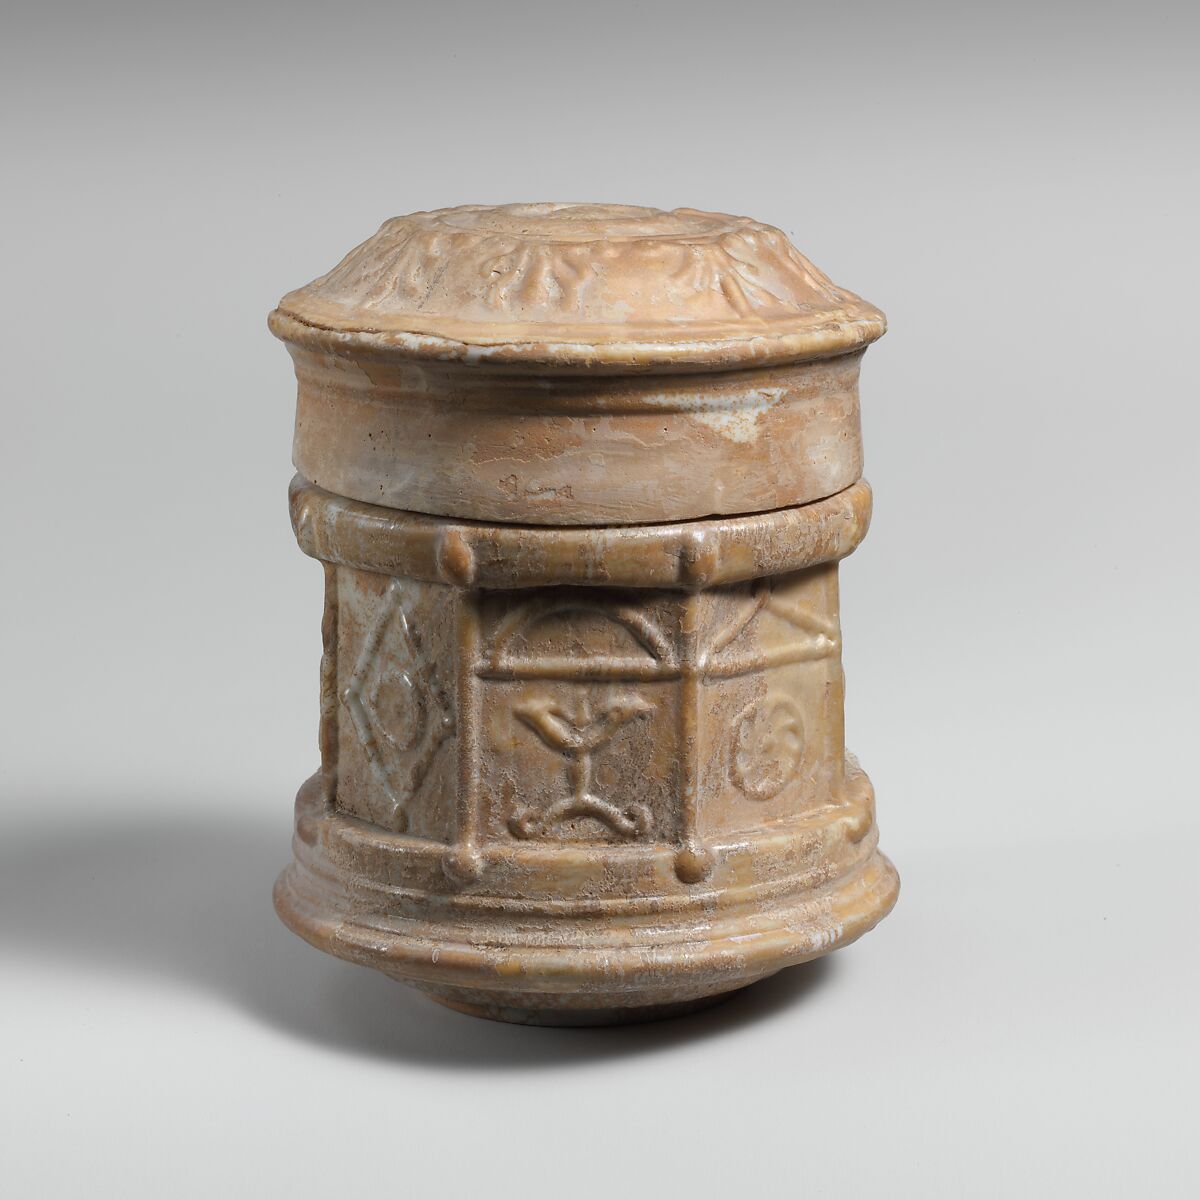 Glass pyxis with lid, Glass, Roman